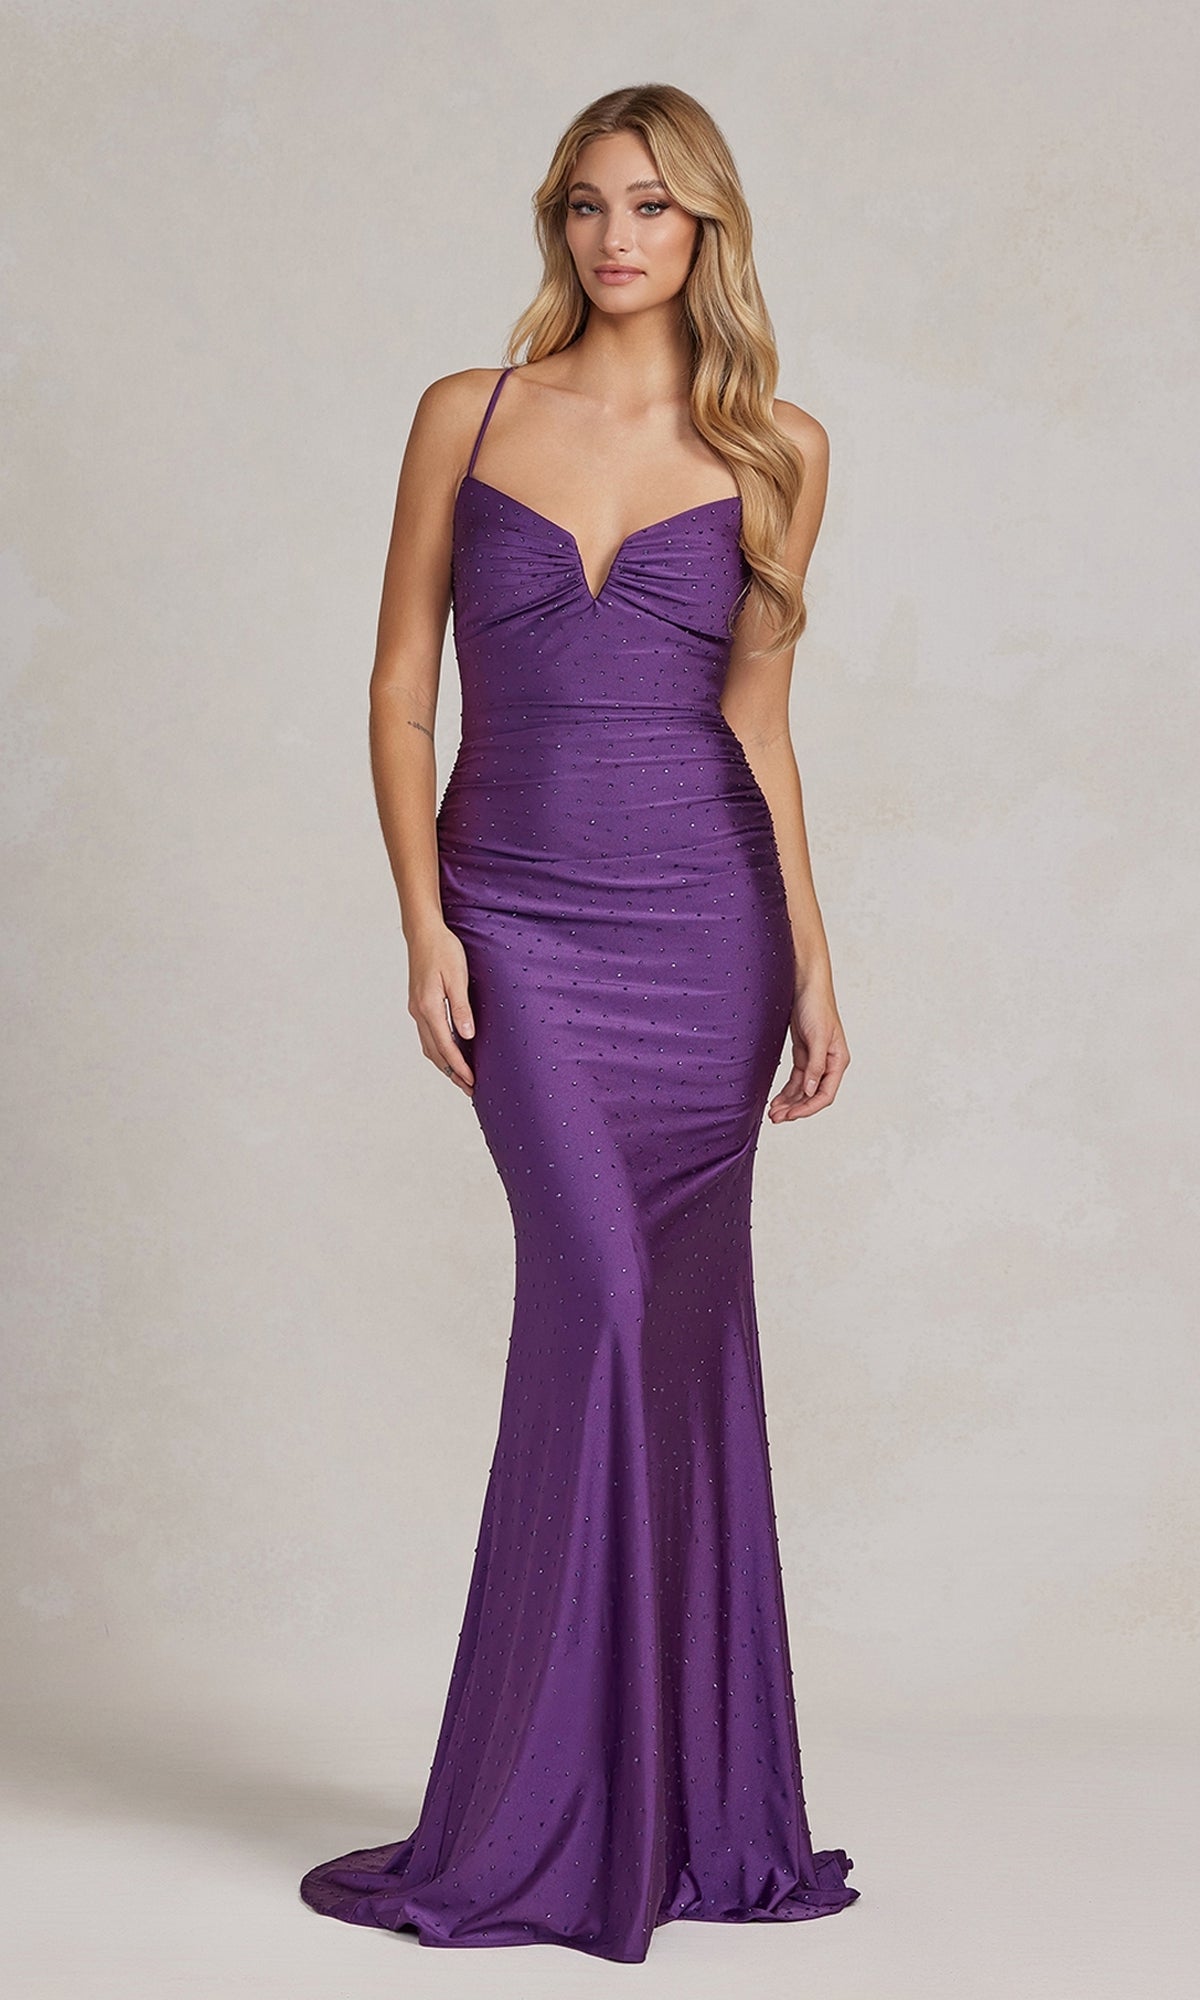 Plum Beaded Tight Long Formal Gown with Strappy Back